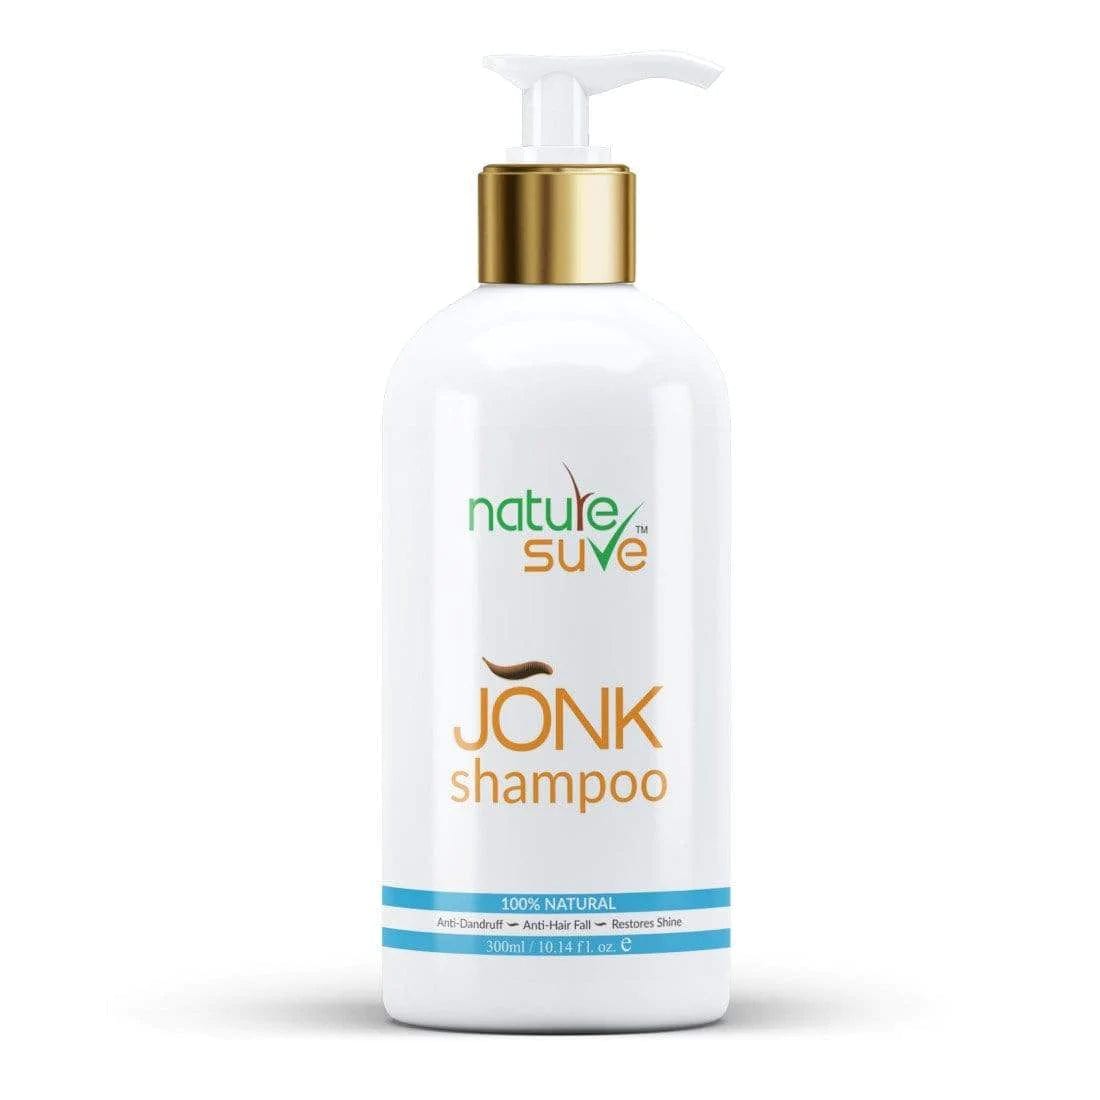 Nature Sure Pack of 1 Nature Sure Jonk Shampoo Hair Cleanser for Men & Women (300ml)